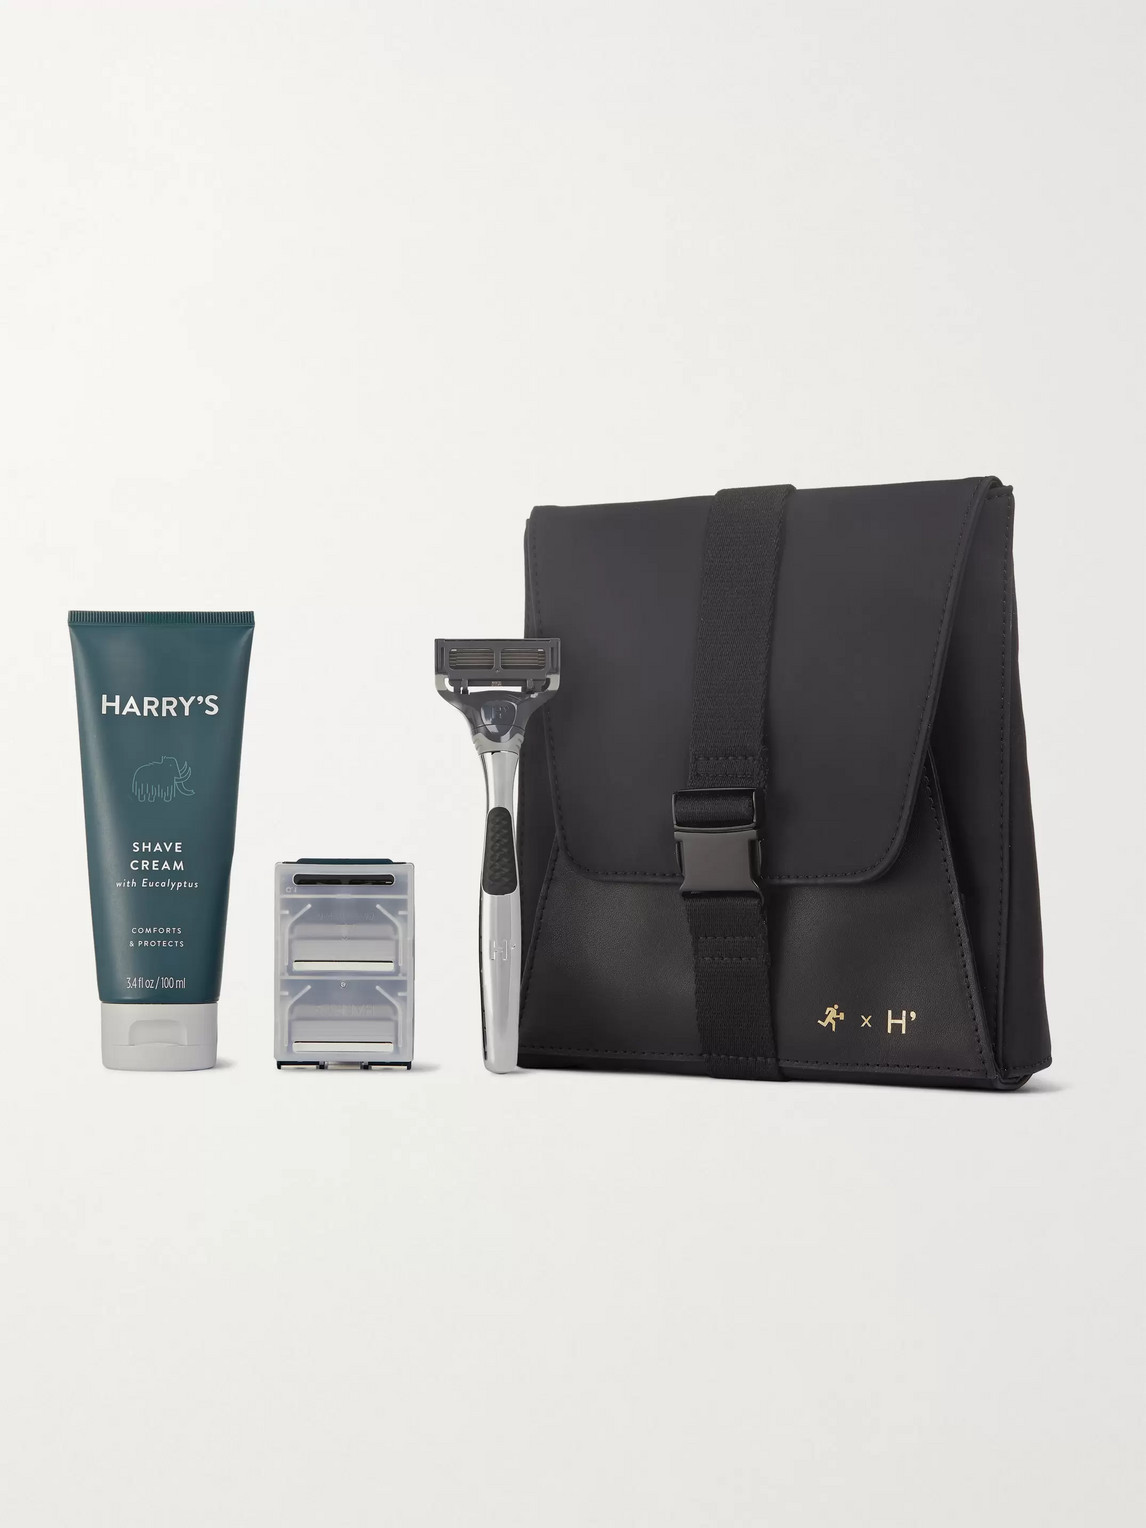 Harry's Want Les Essentiels Travel Shaving Set In Colorless